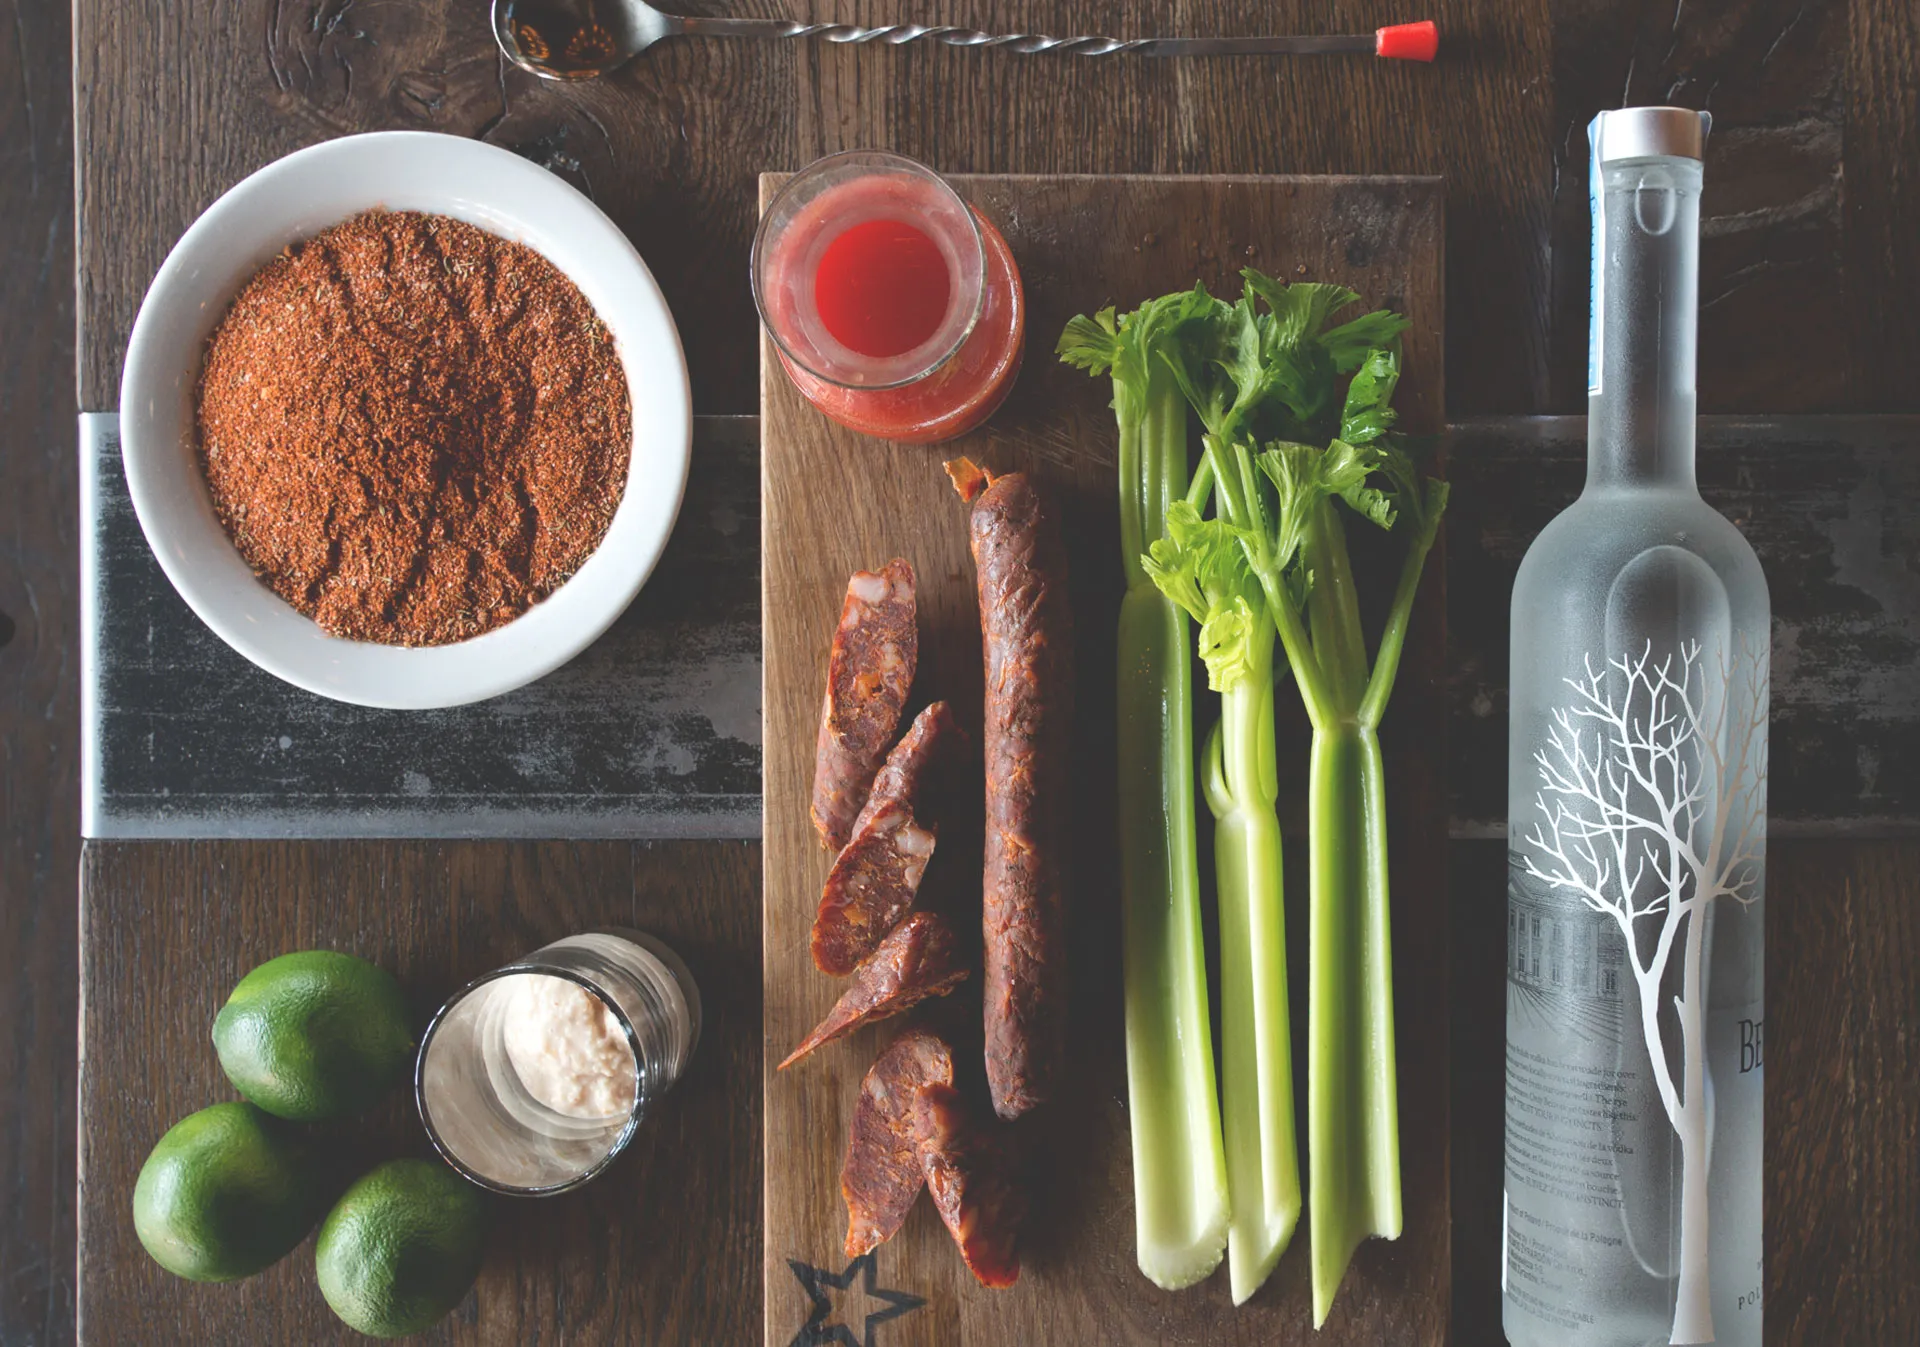 All the ingredients needed for a NTNL Caesar.